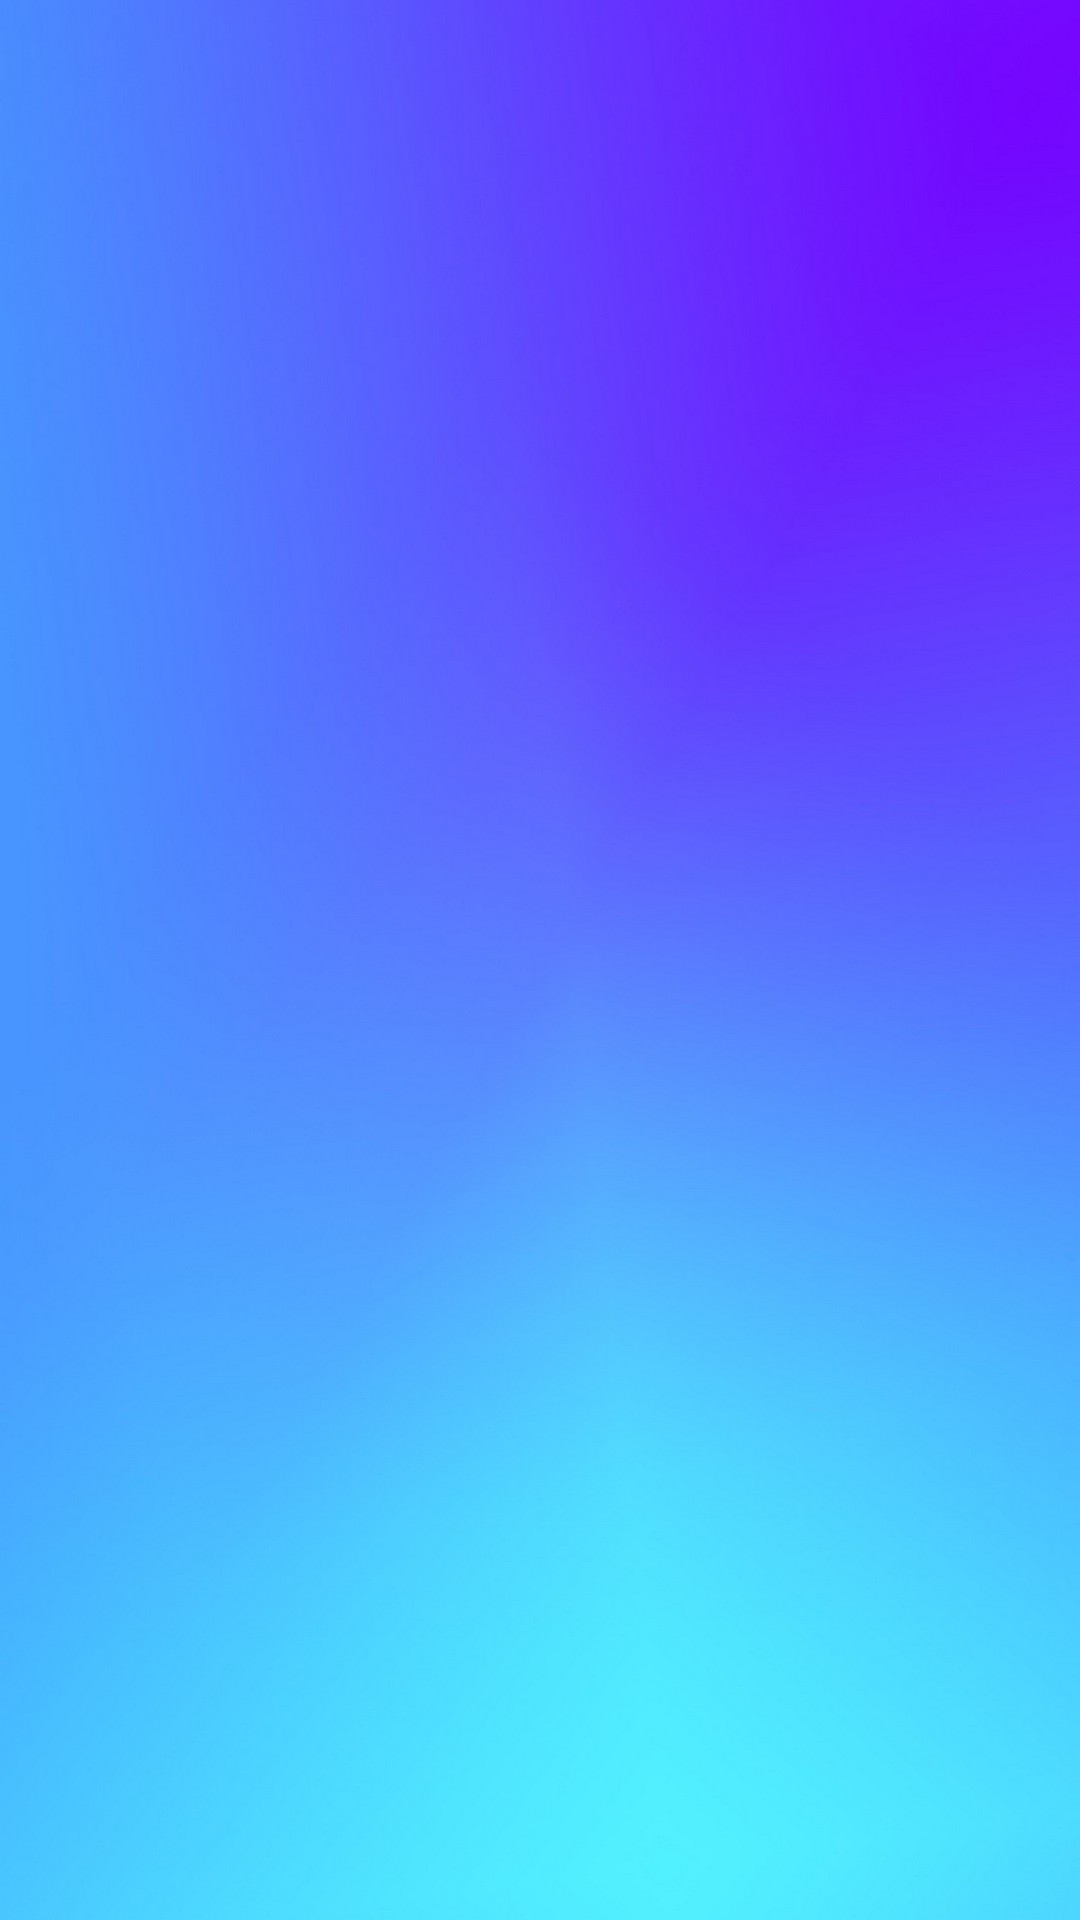 Gradient Phone Wallpaper with high-resolution 1080x1920 pixel. Download all Mobile Wallpapers and Use them as wallpapers for your iPhone, Tablet, iPad, Android and other mobile devices